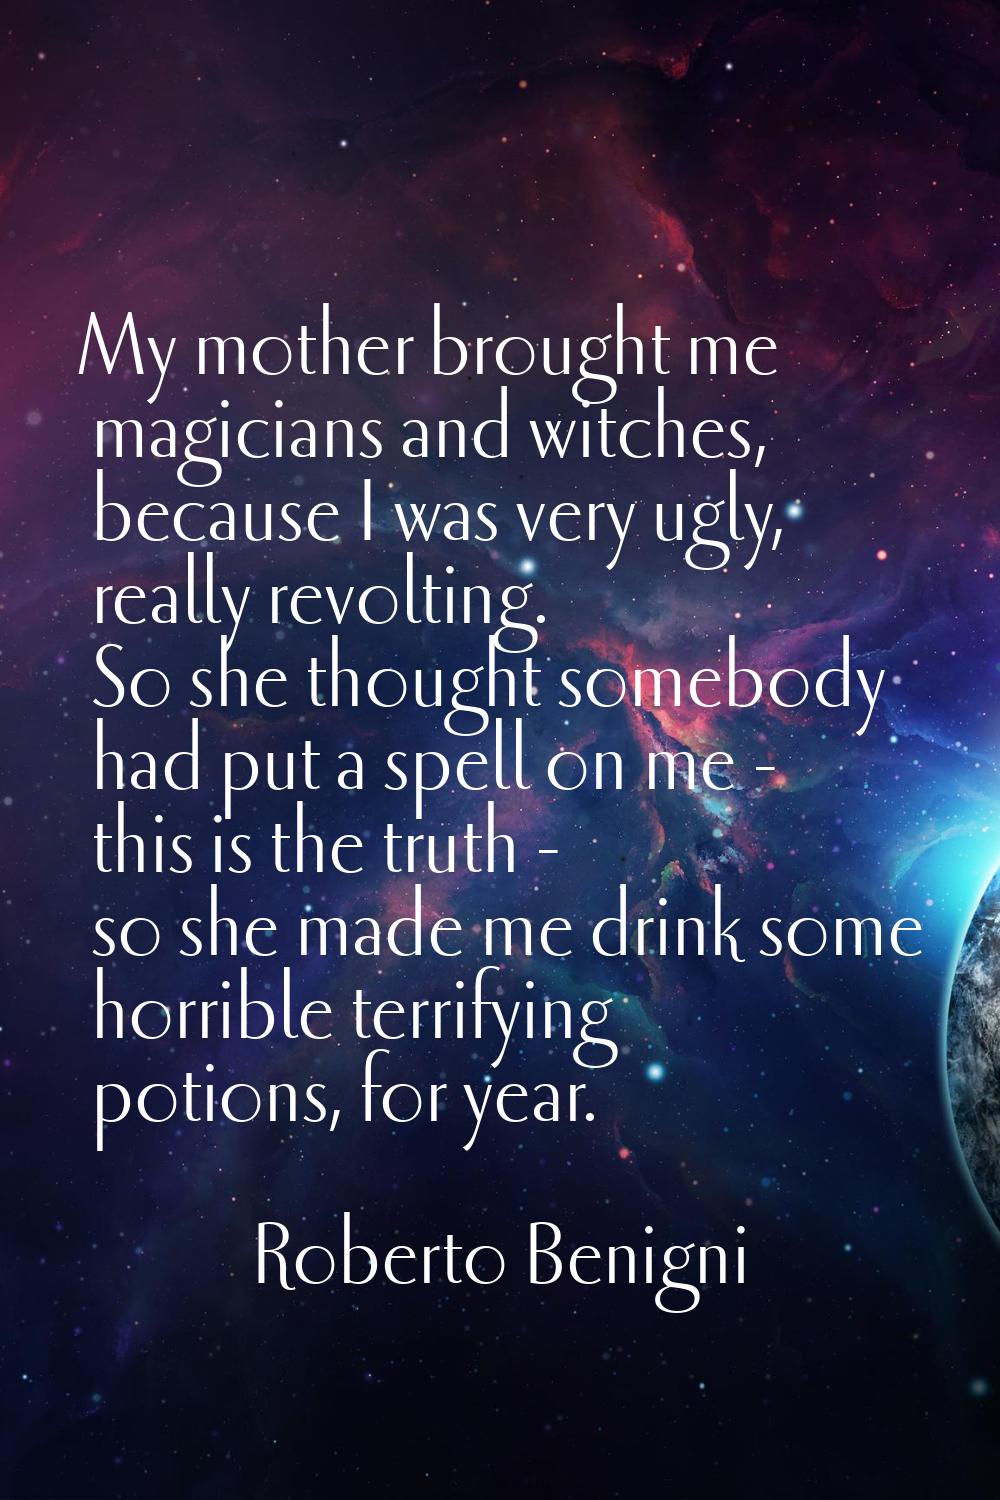 My mother brought me magicians and witches, because I was very ugly, really revolting. So she thoug